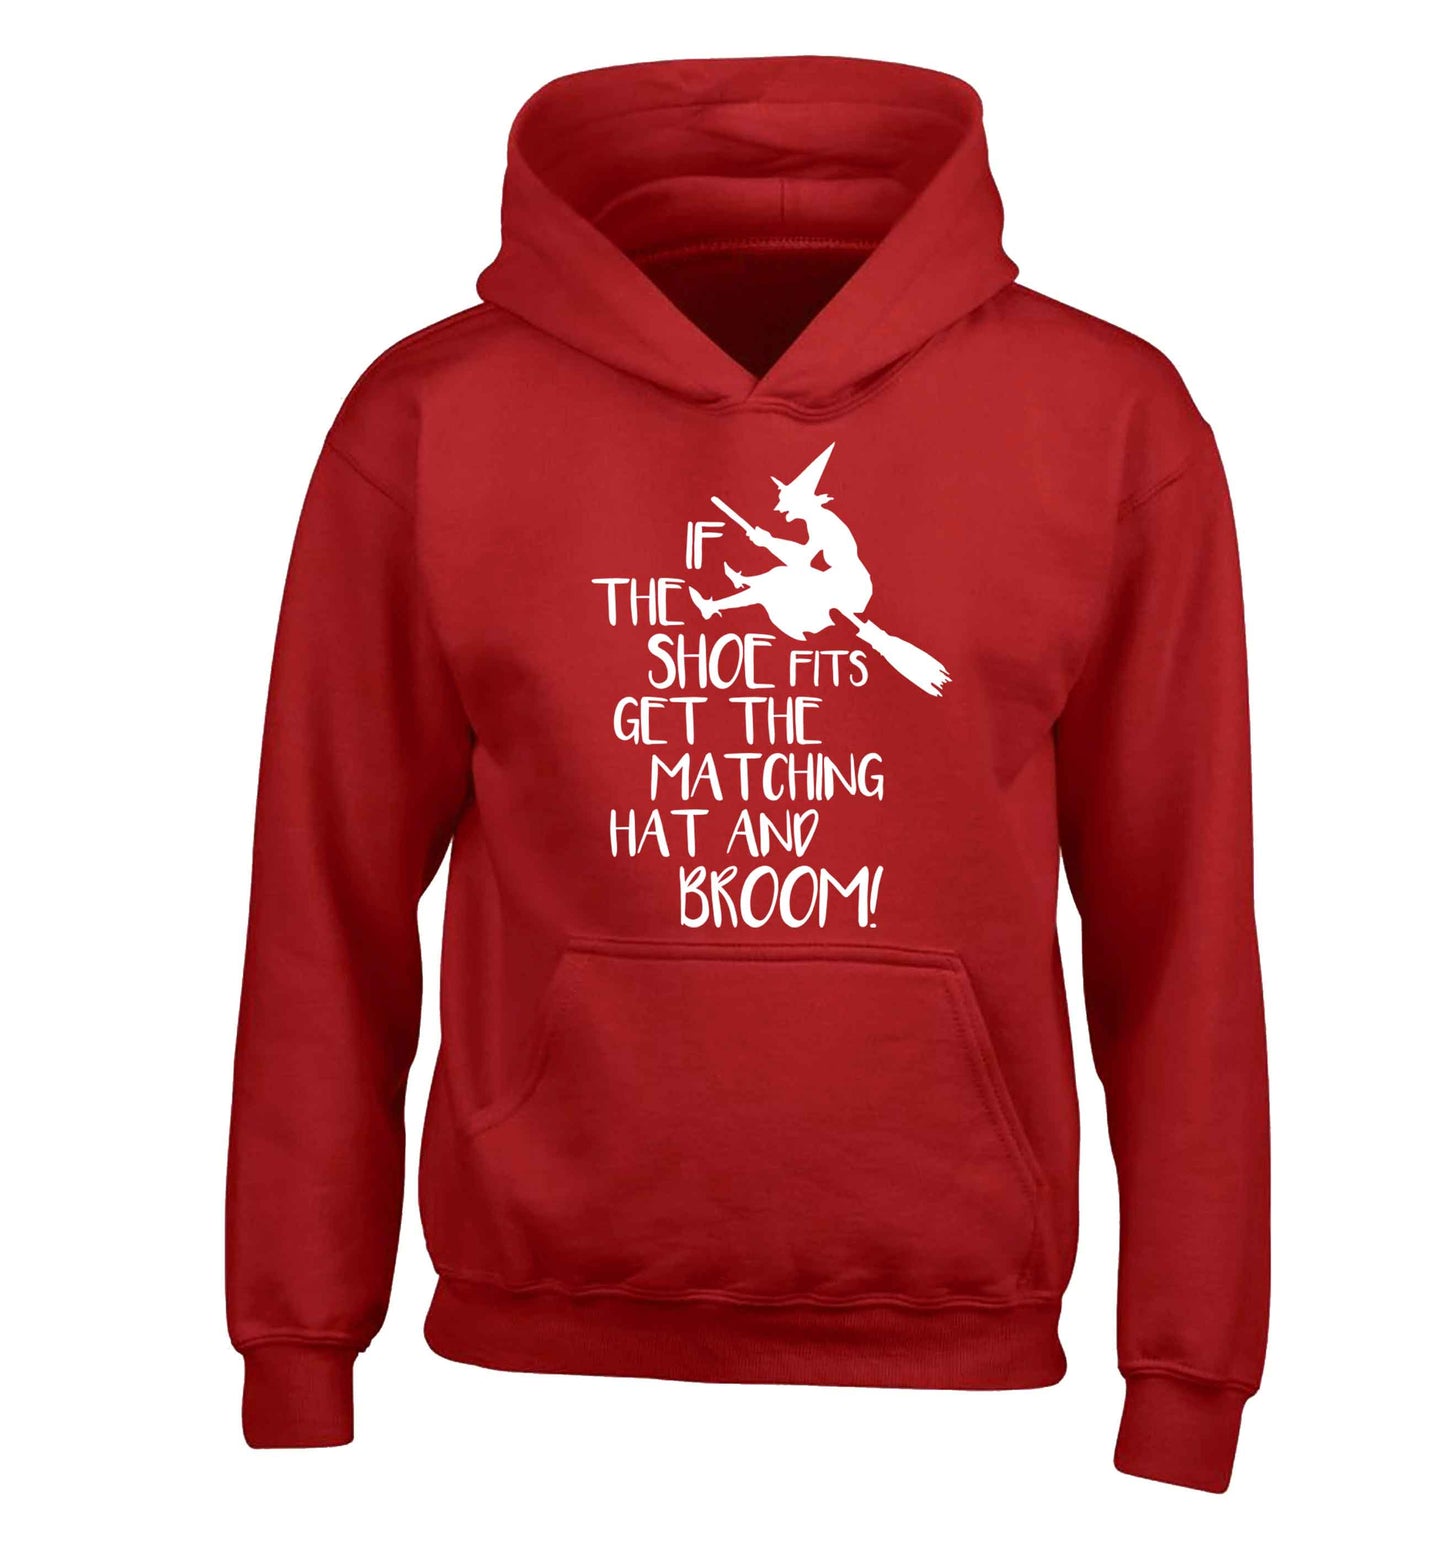 If the shoe fits get the matching hat and broom children's red hoodie 12-13 Years